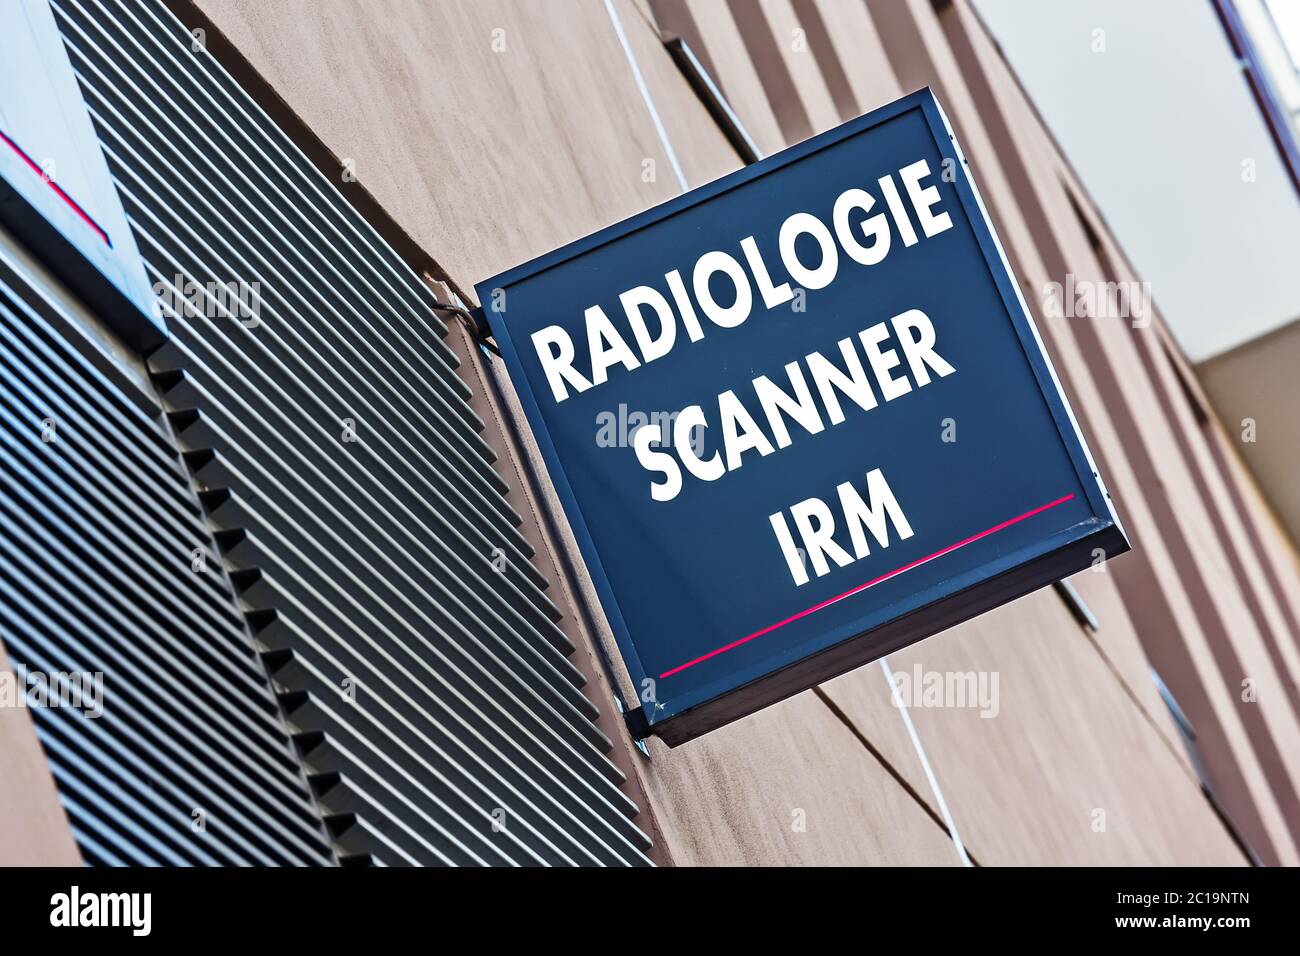 Sign on building indicating radiology MRI and medical scan services (Radiologie Scanner IRM in French) Stock Photo